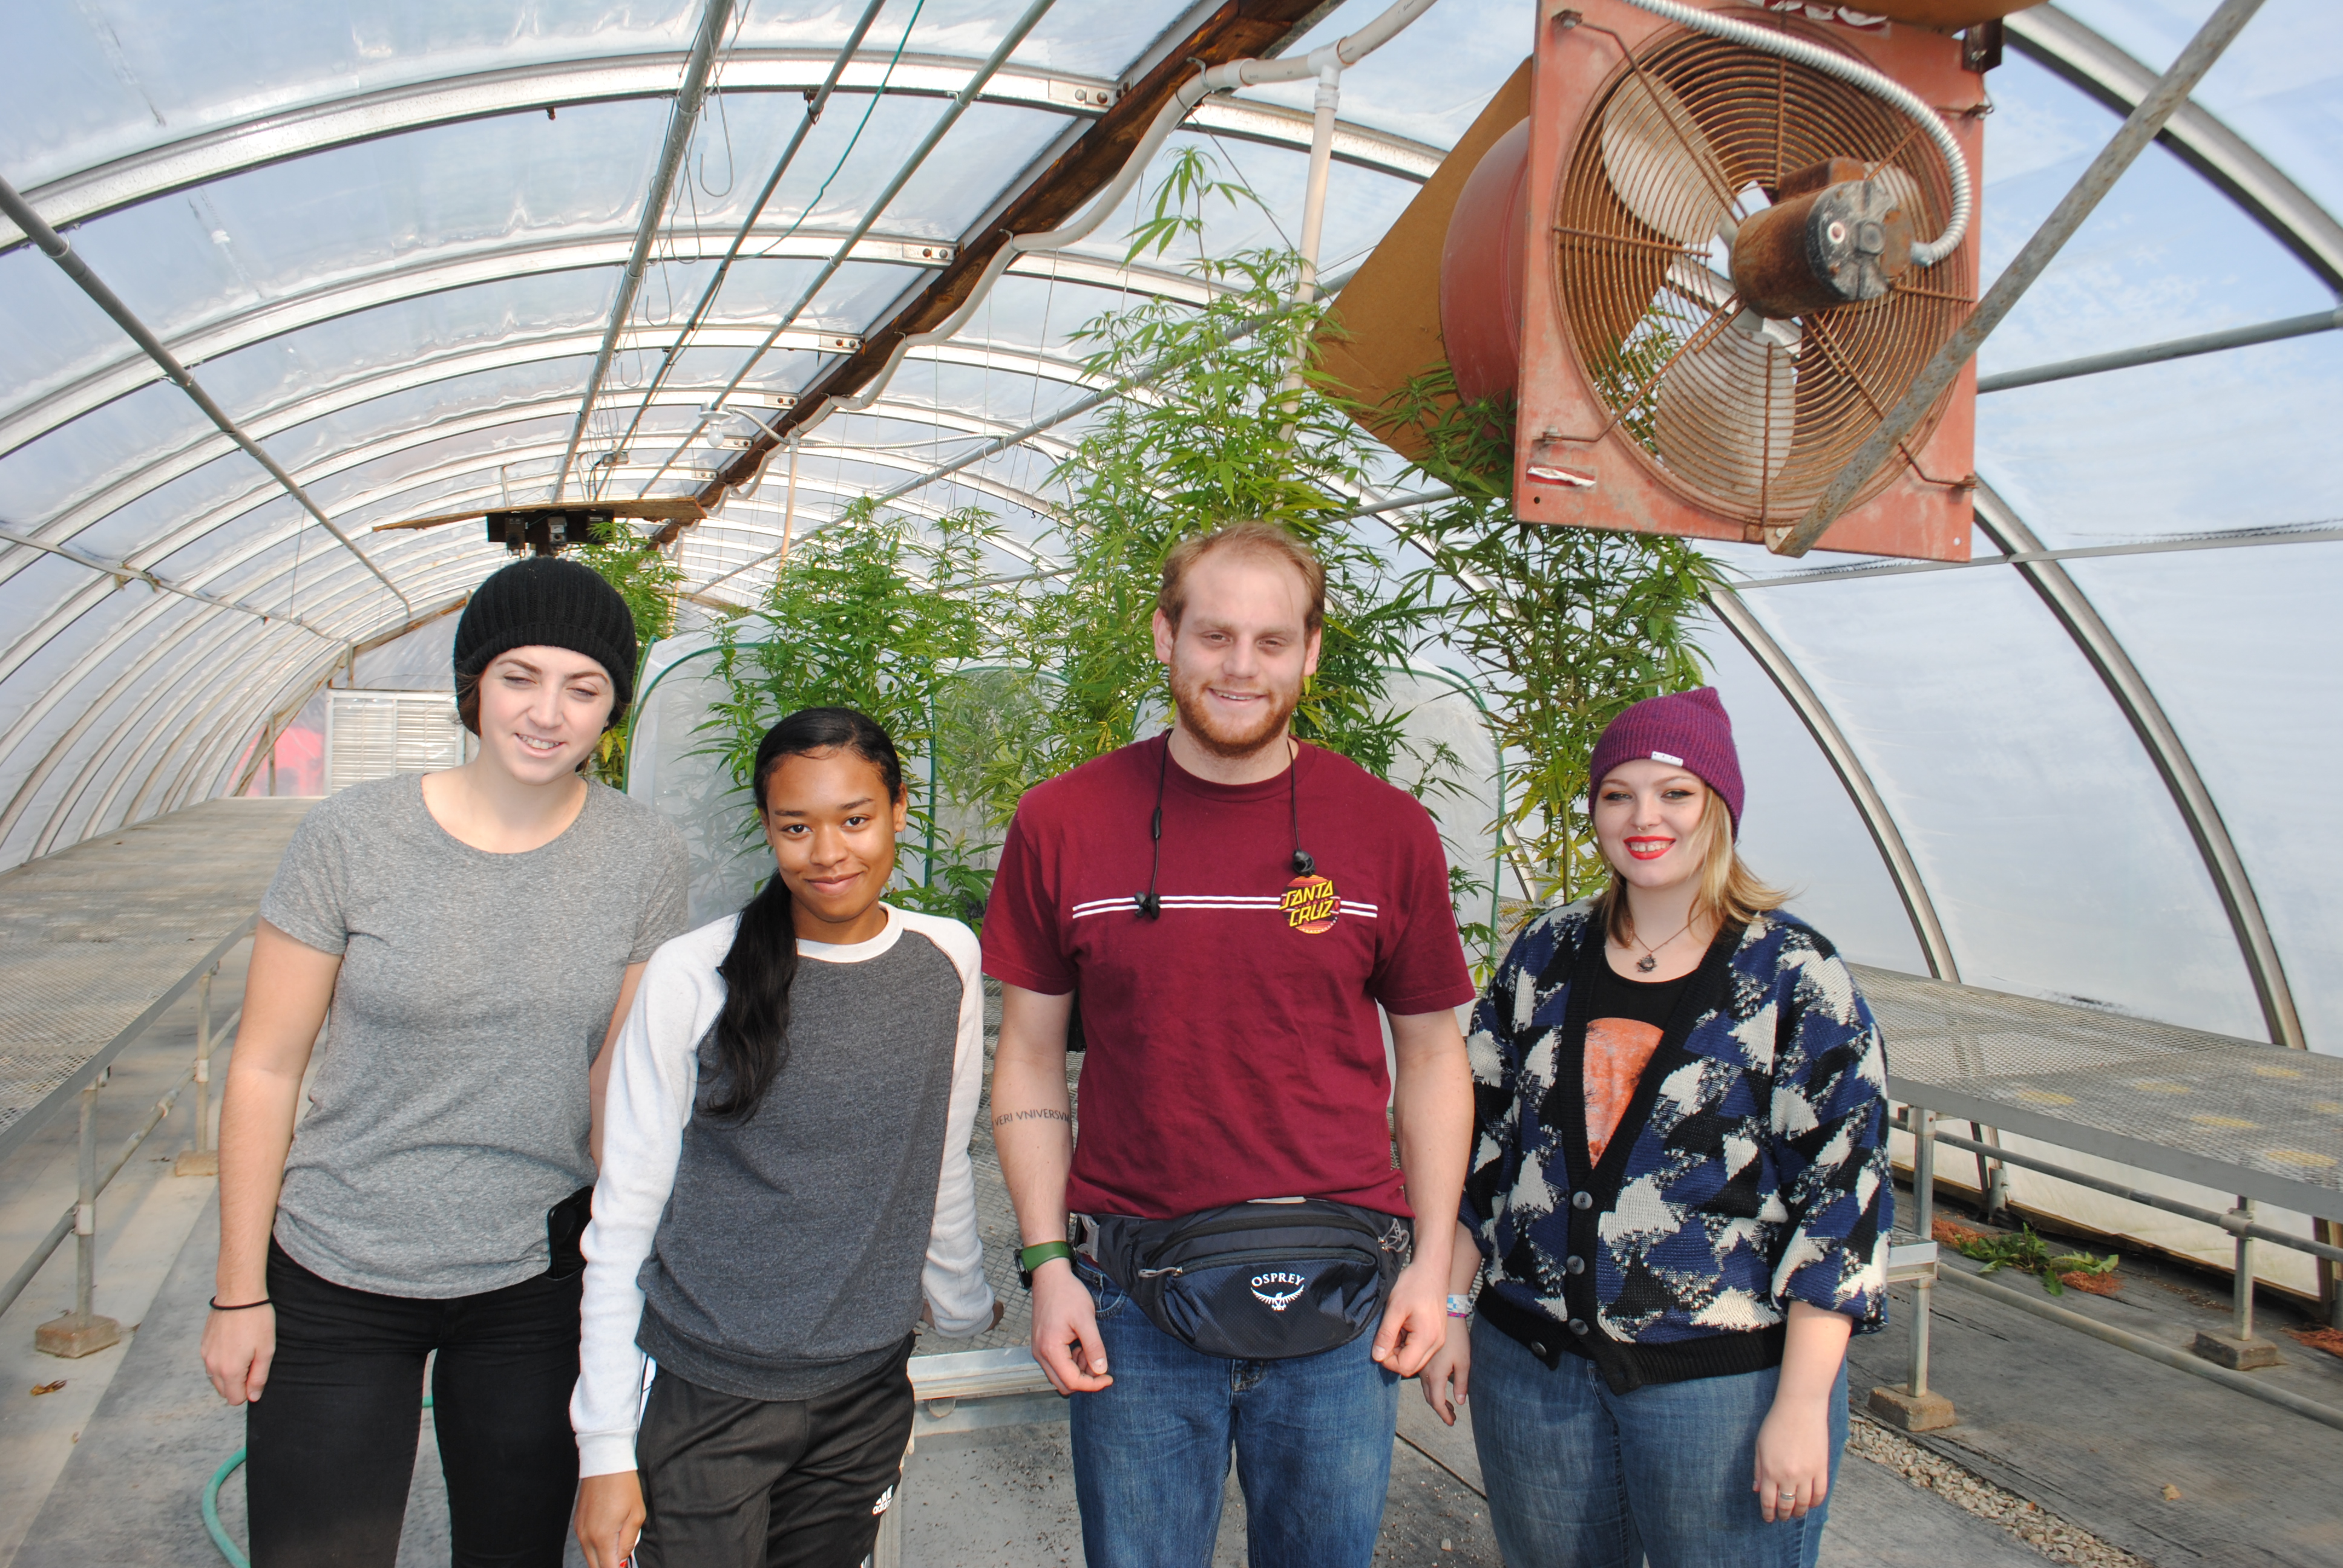 Students working in high tunnels